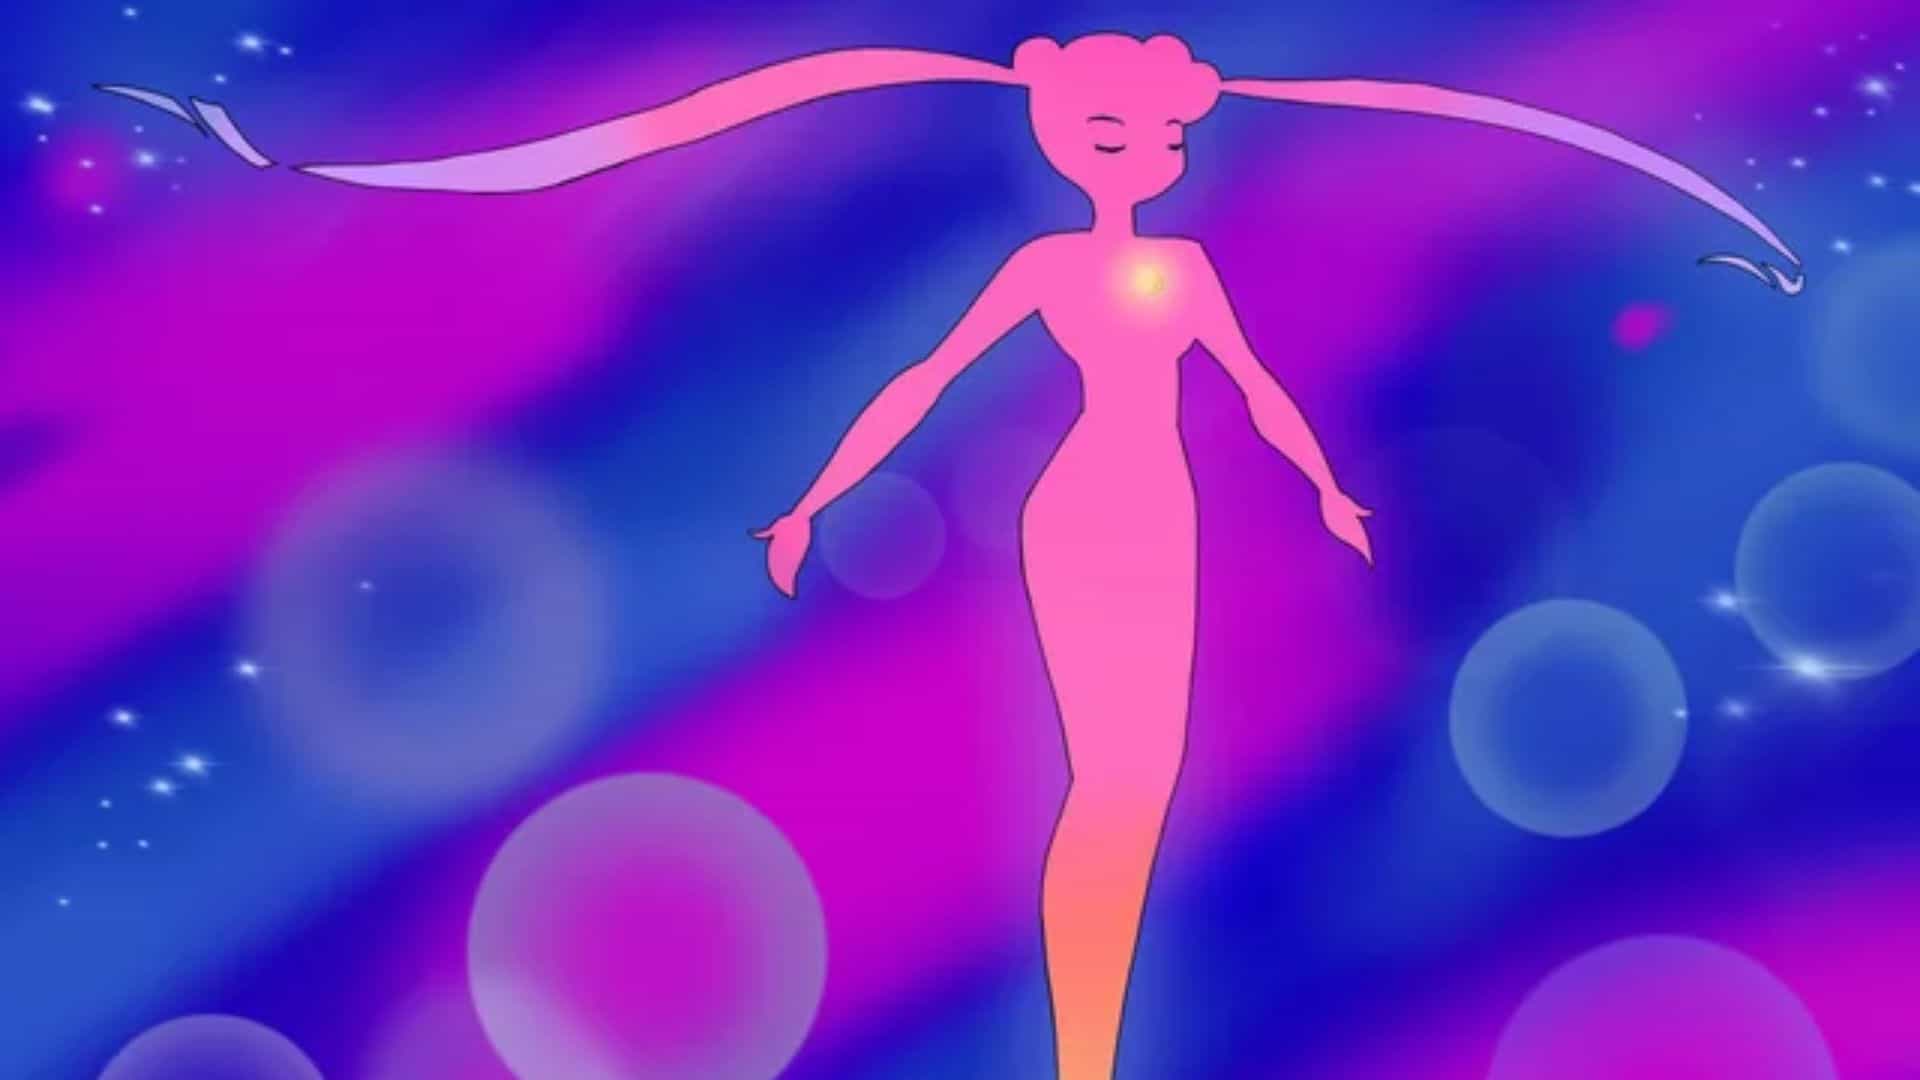 A still frame of Usagi’s transformation into Sailor Moon from Toei Animation